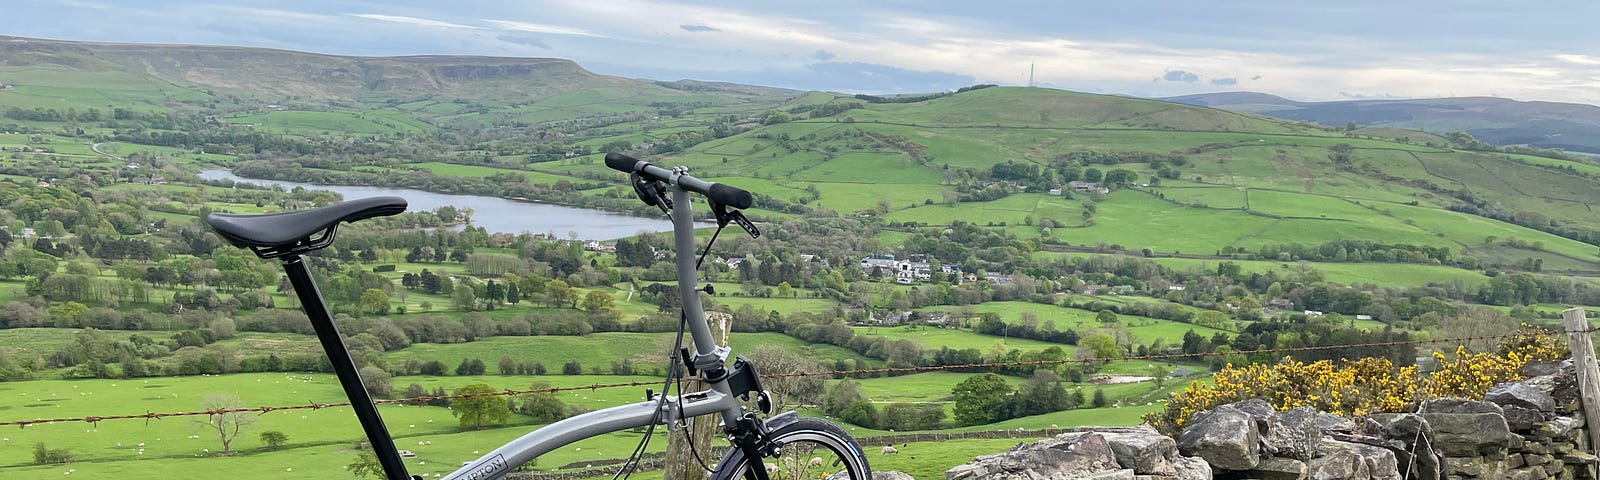 A Brompton bicycle balanced on a stone fence with a green Peak District valley in the background as well as a body of water